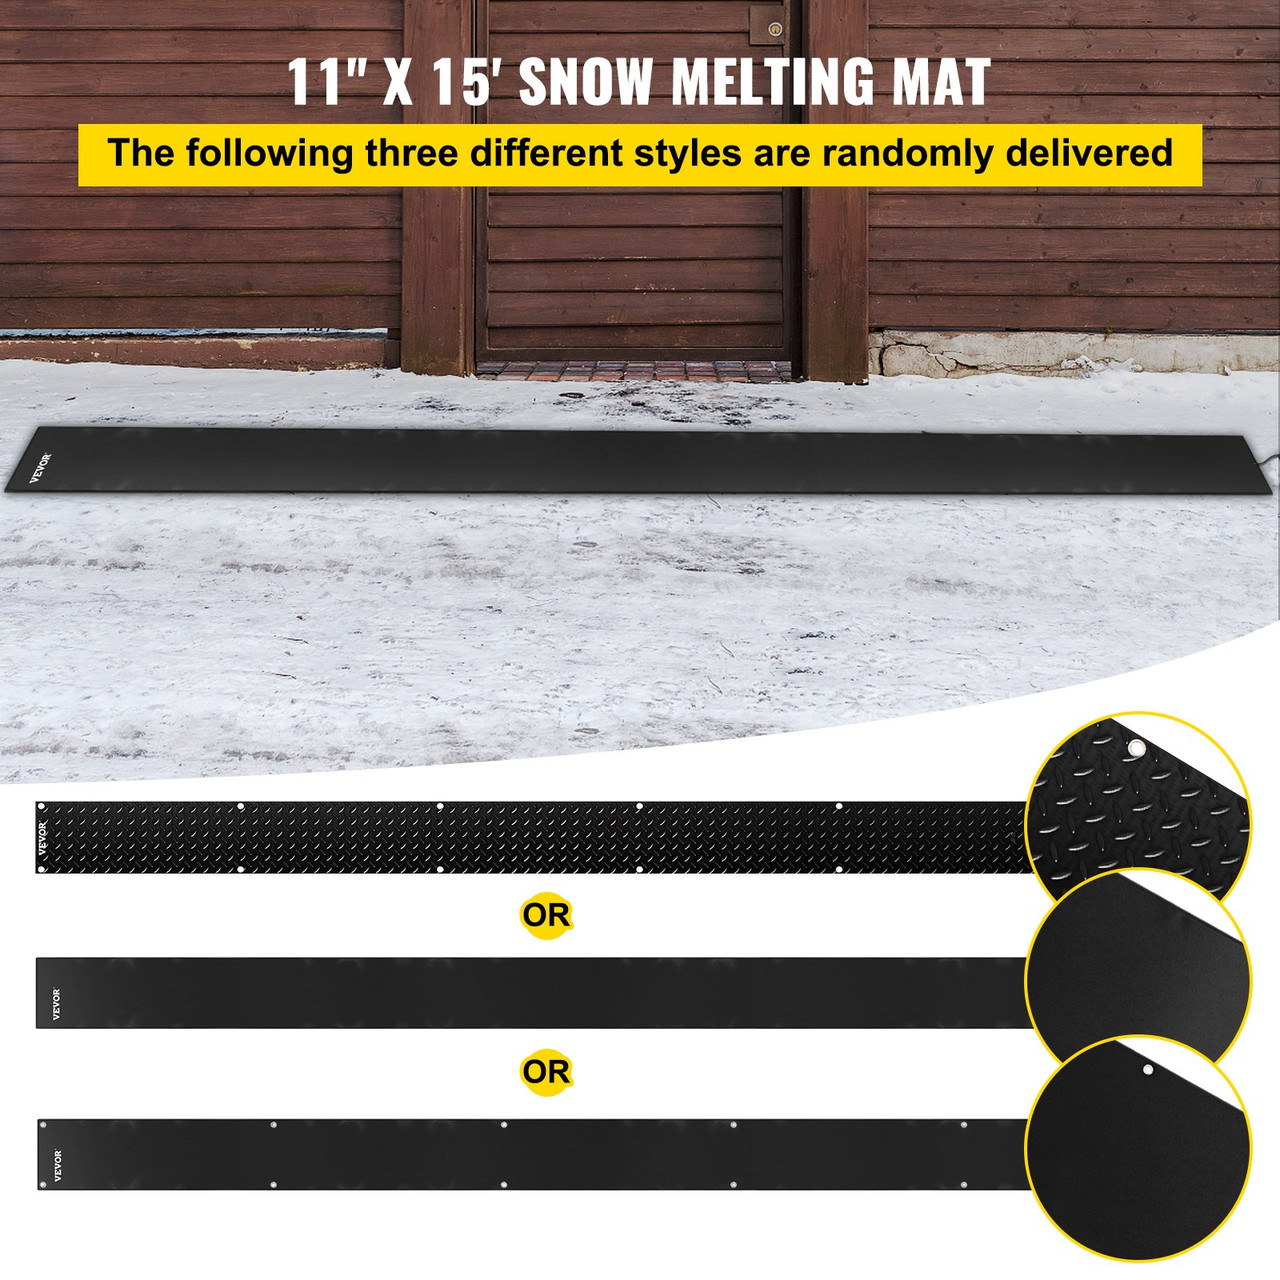 Snow Melting Mat, 11in x 15ft Heated Walkway Mat, 110V Snow and Ice Melting Mat, PVC Heated Mat with 6ft Power Cord, Slip-Proof, Ideal Winter Outdoor